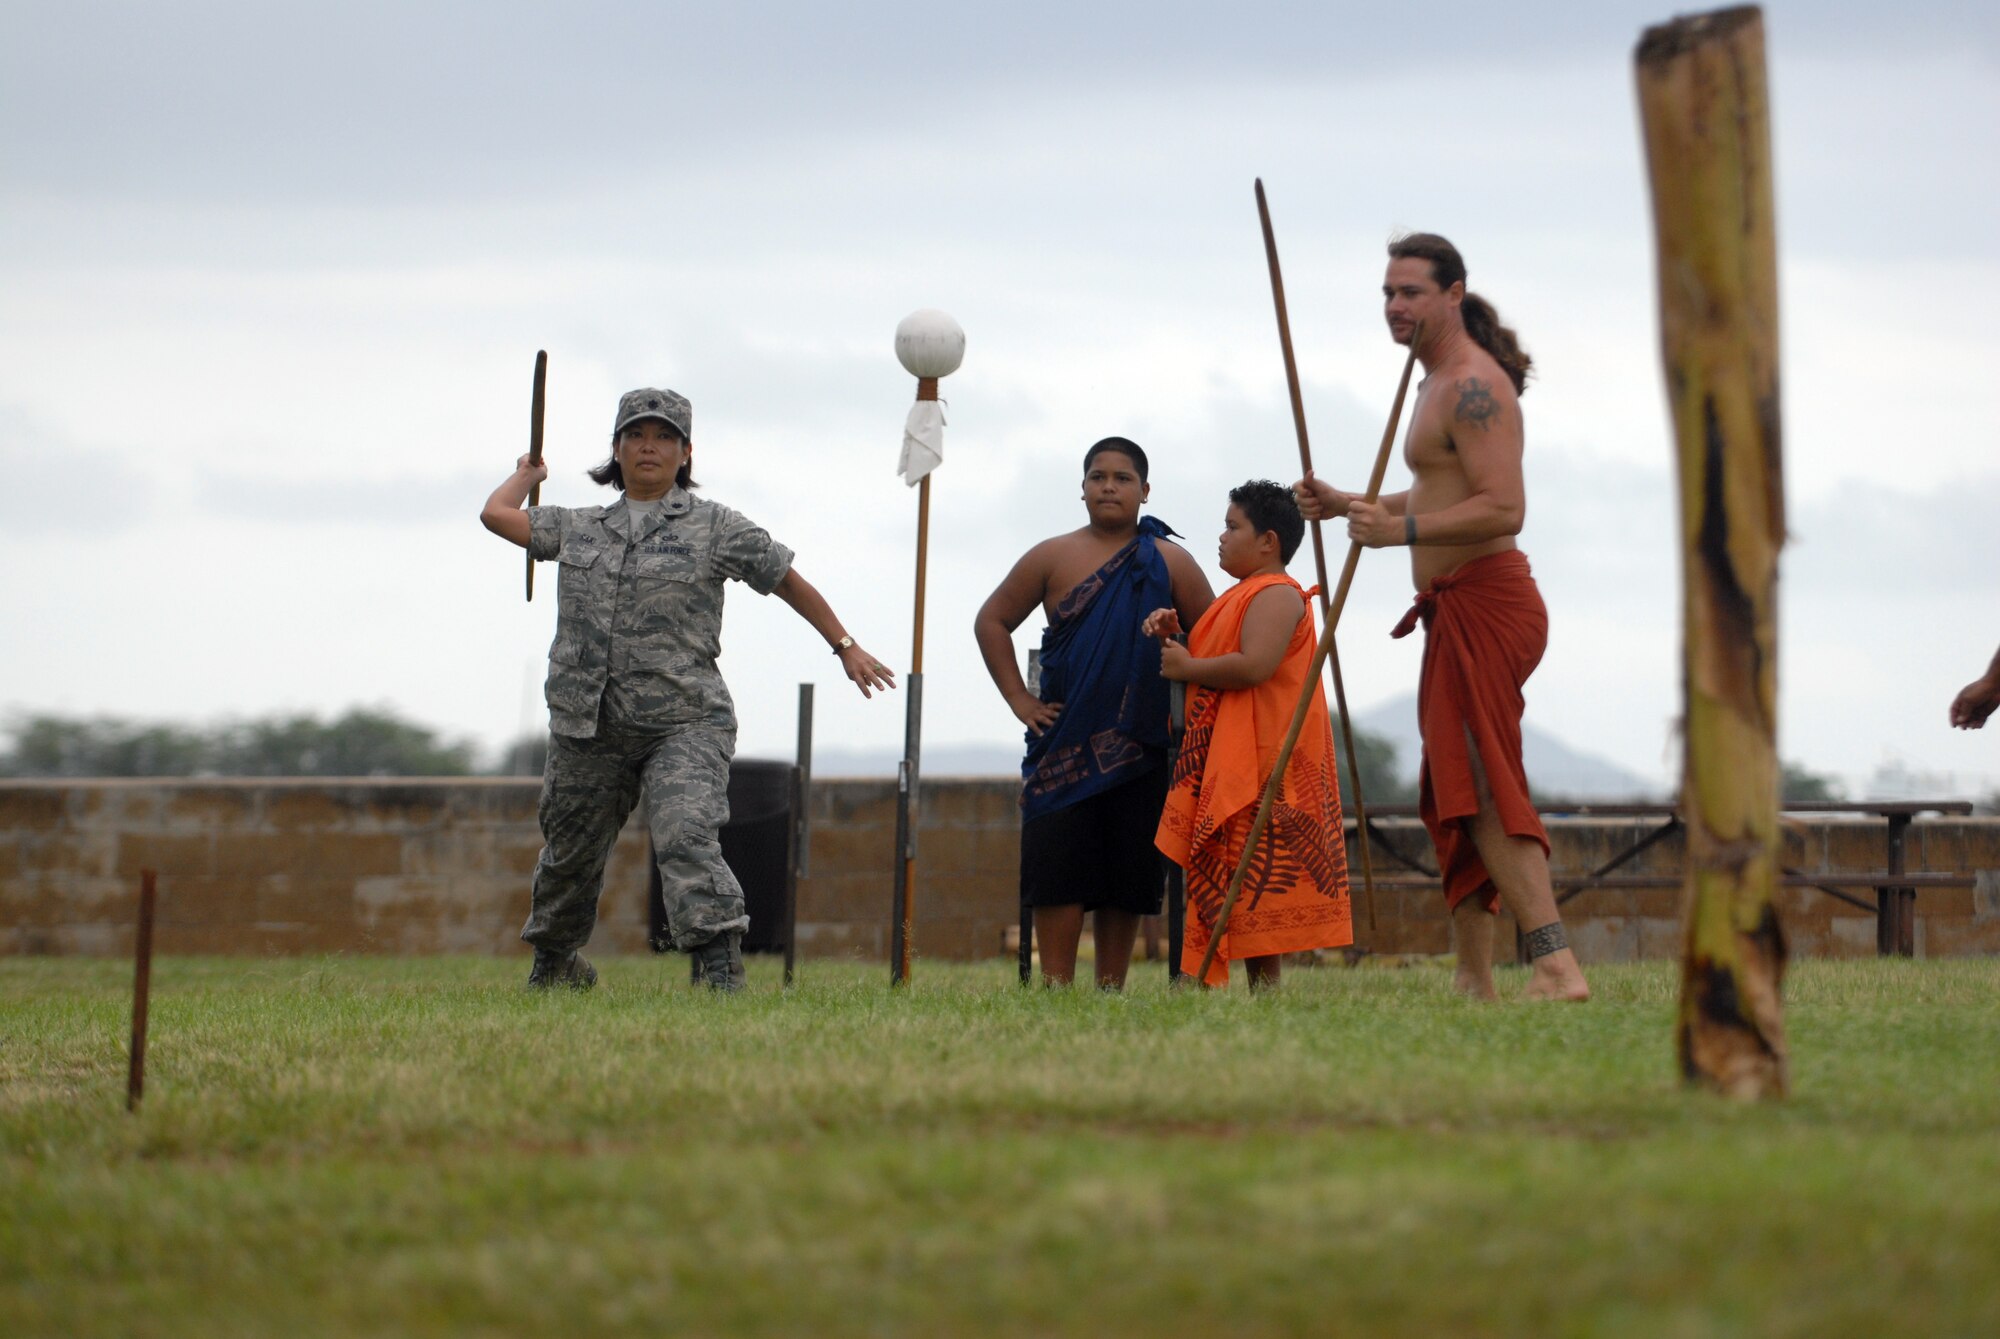 HICKAM AIR FORCE BASE, Hawaii -- Lt. Col. Tracey Saiki, 15th Airlift Wing public affairs, attempts to throw a spear into a trunk during the O'o Ihe event at the Makahiki Festival here, Nov. 14. For more than two-thousand years, the significance of Lono and his contributions to the beliefs and practices of the early Hawaiian people, influenced the celebration of events held during the Makahiki Festival throughout the Hawaiian Islands. Since Lono was the embodiment of all the characteristics of peace and welfare, all warfare was strictly forbidden during the time of the Makahiki. Since Lono represented the spiritual life-force that came out of all agricultural efforts, much feasting of every kind was done during the four months of the Makahiki. This focus on health and welfare made games of skill that tested a healthy body and mind a focal point of the Makahiki games. (U.S. Air Force photo/Senior Airman Gustavo Gonzalez)